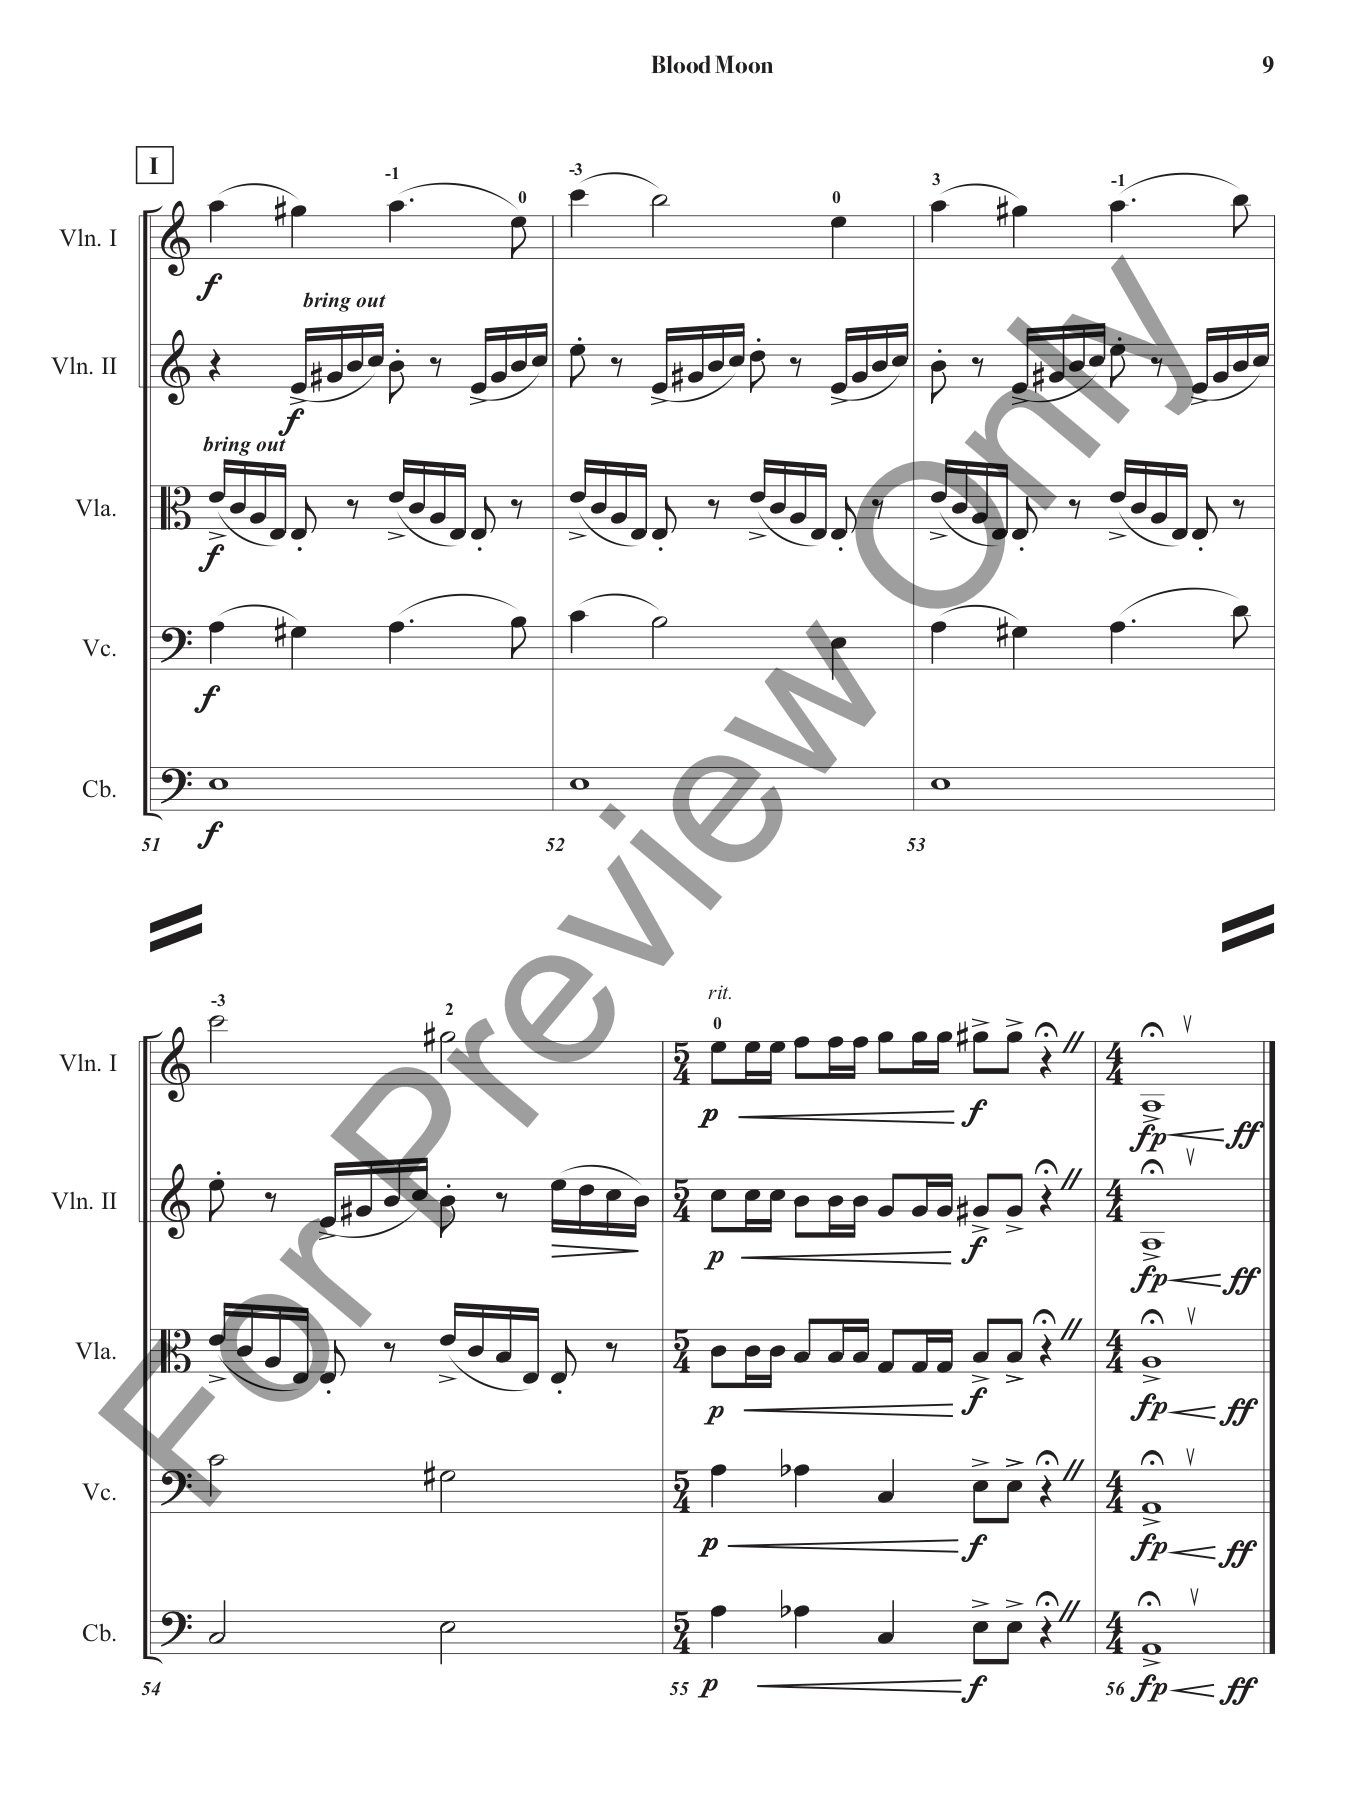 Blood Moon for String Orchestra - Cover Page and Full Score Only (for Preview Only p11).jpg